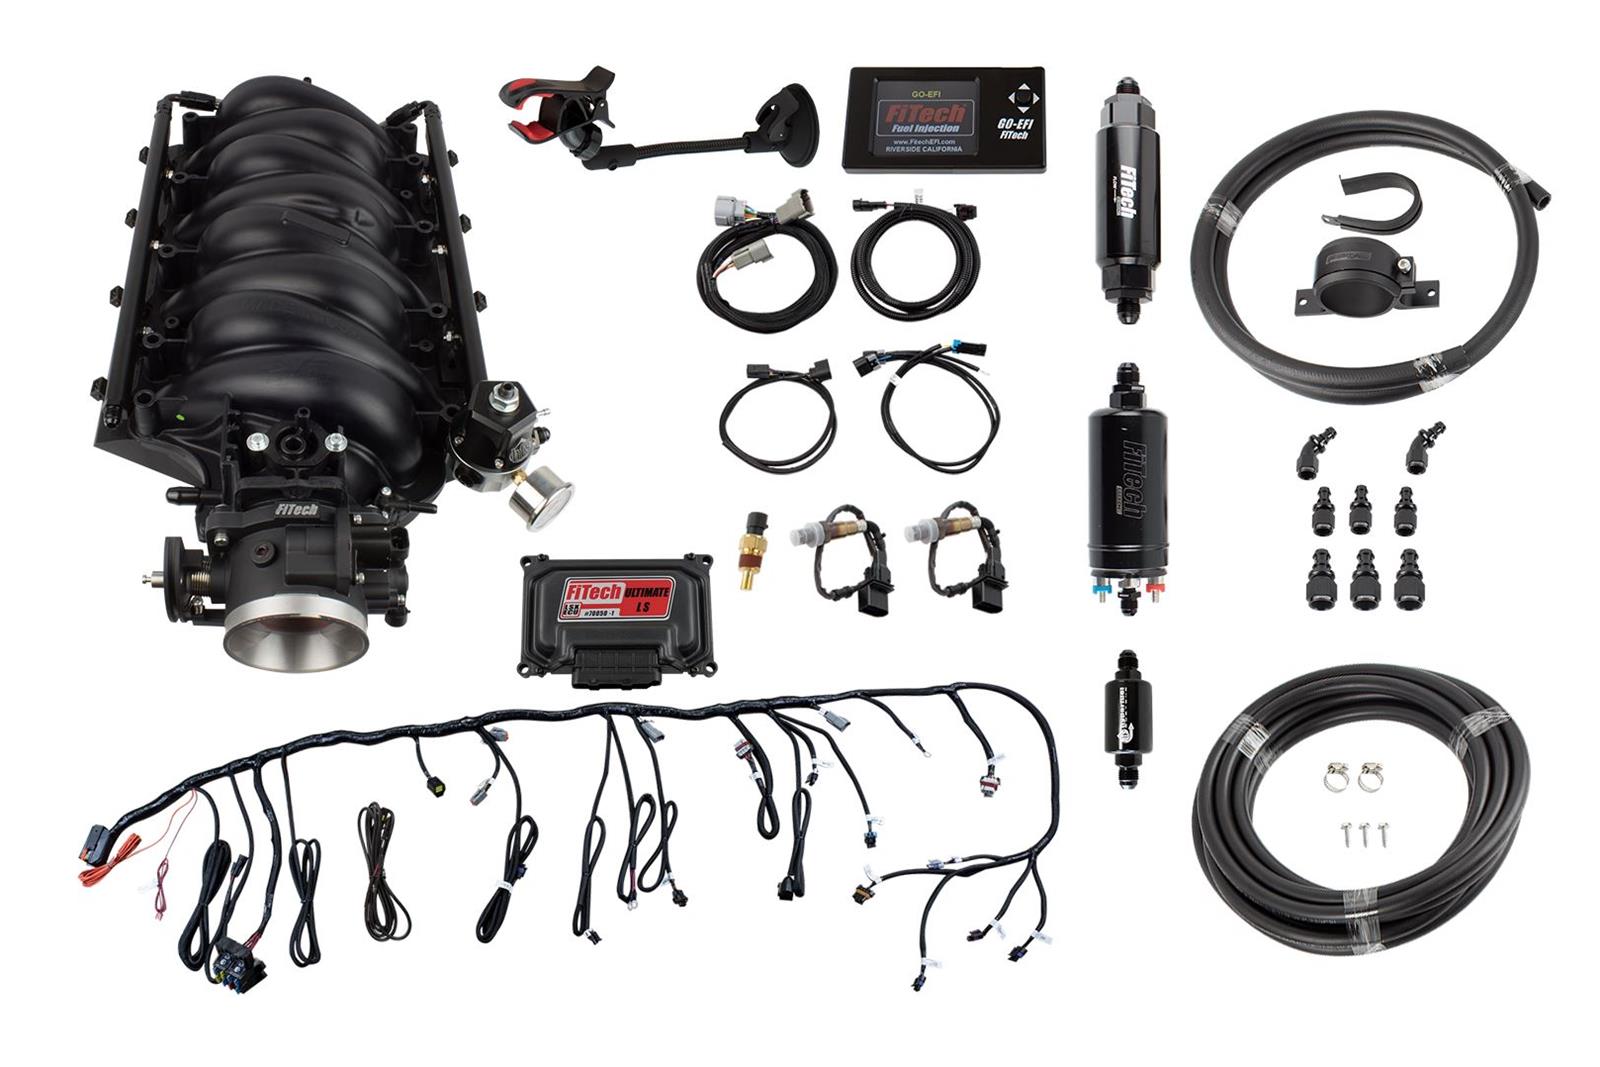 FiTech Fuel Injection 71020 - FiTech Ultimate LS Torque Plus EFI 600 HP Fue...